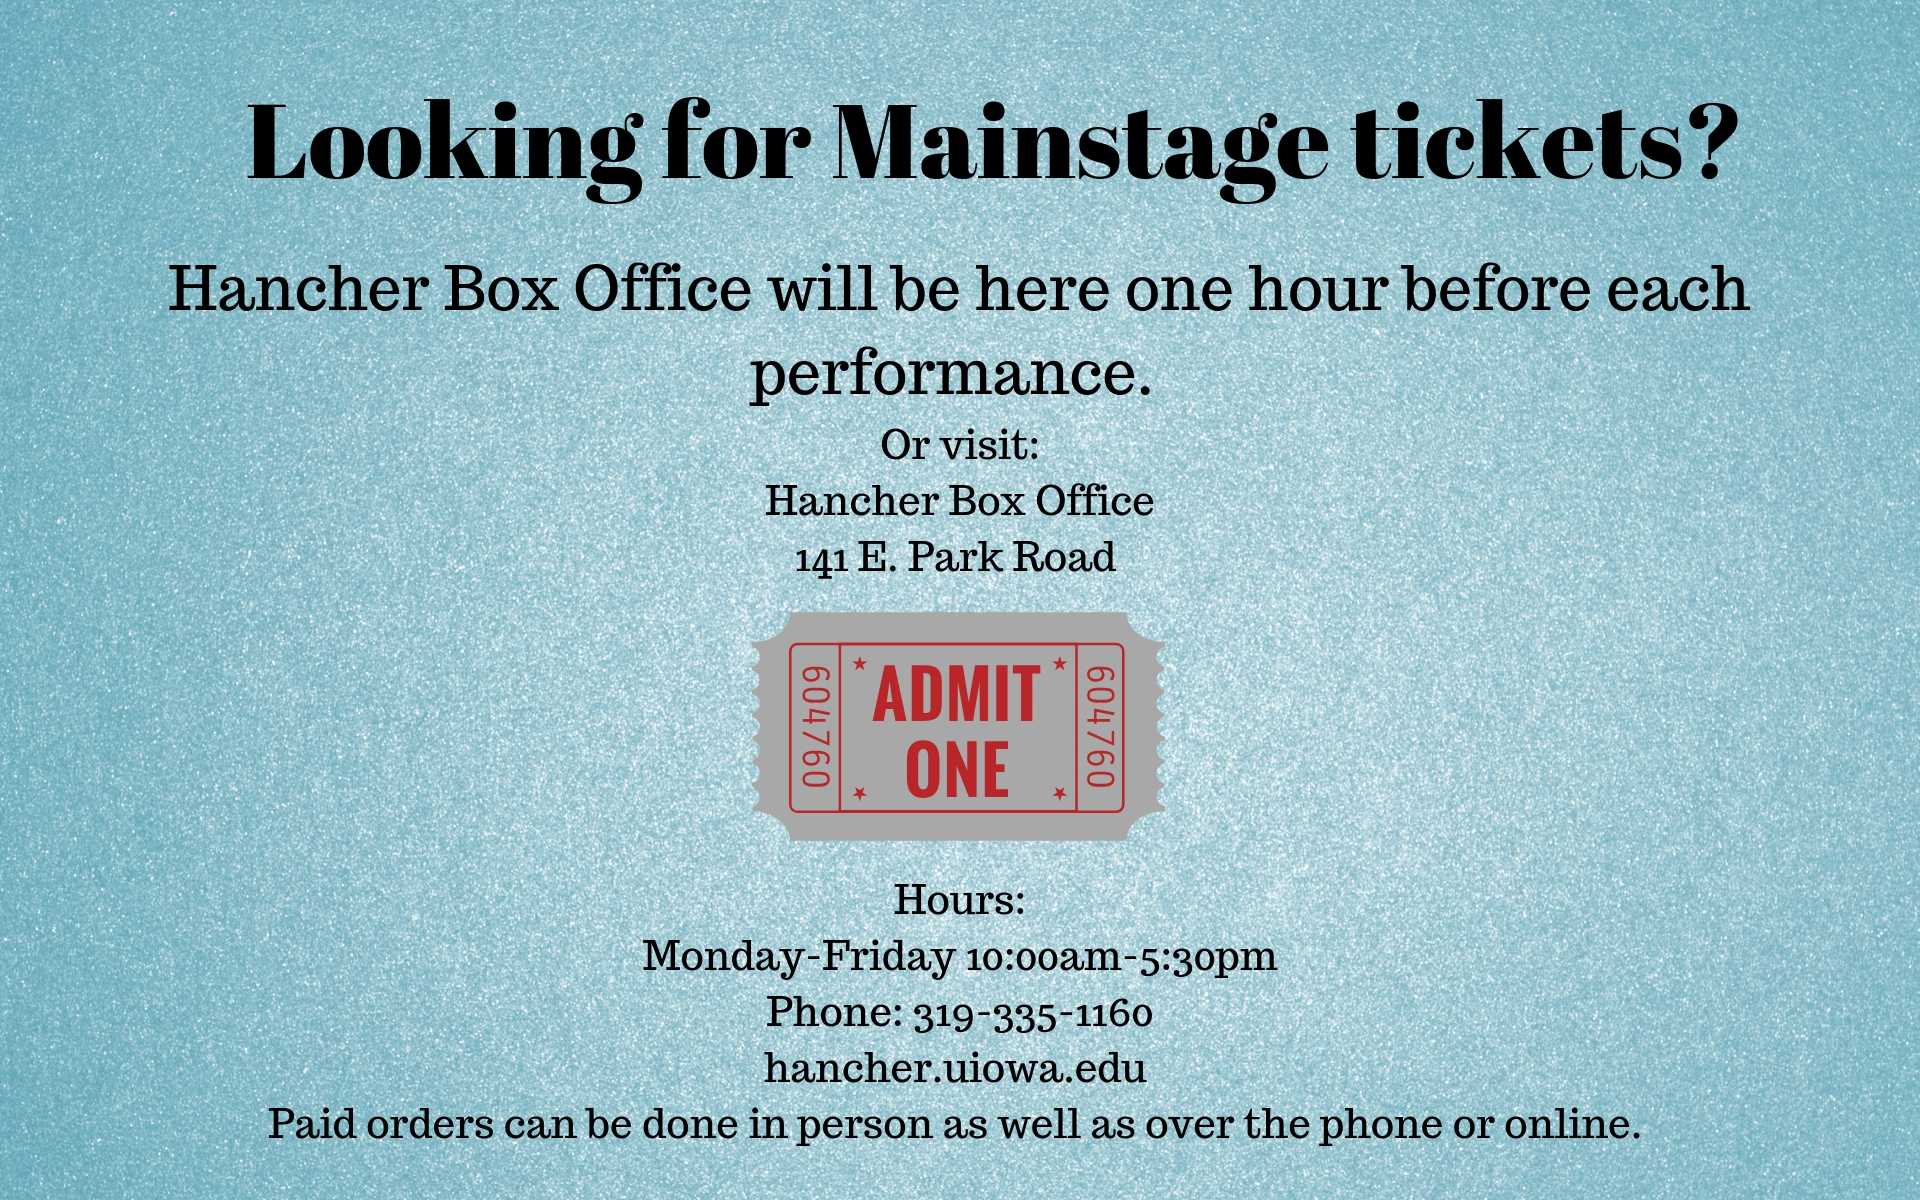 Looking for Mainstage tickets? Hancher Box Office will be here one hour before each performance. Or visit: Hancher Box Office 141 E. Park Road Hours: 10:00am-5:30pm Monday-Friday Phone: 319-335-1160 hancher.uiowa.edu Paid orders can be done in person as well as over the phone or online. 